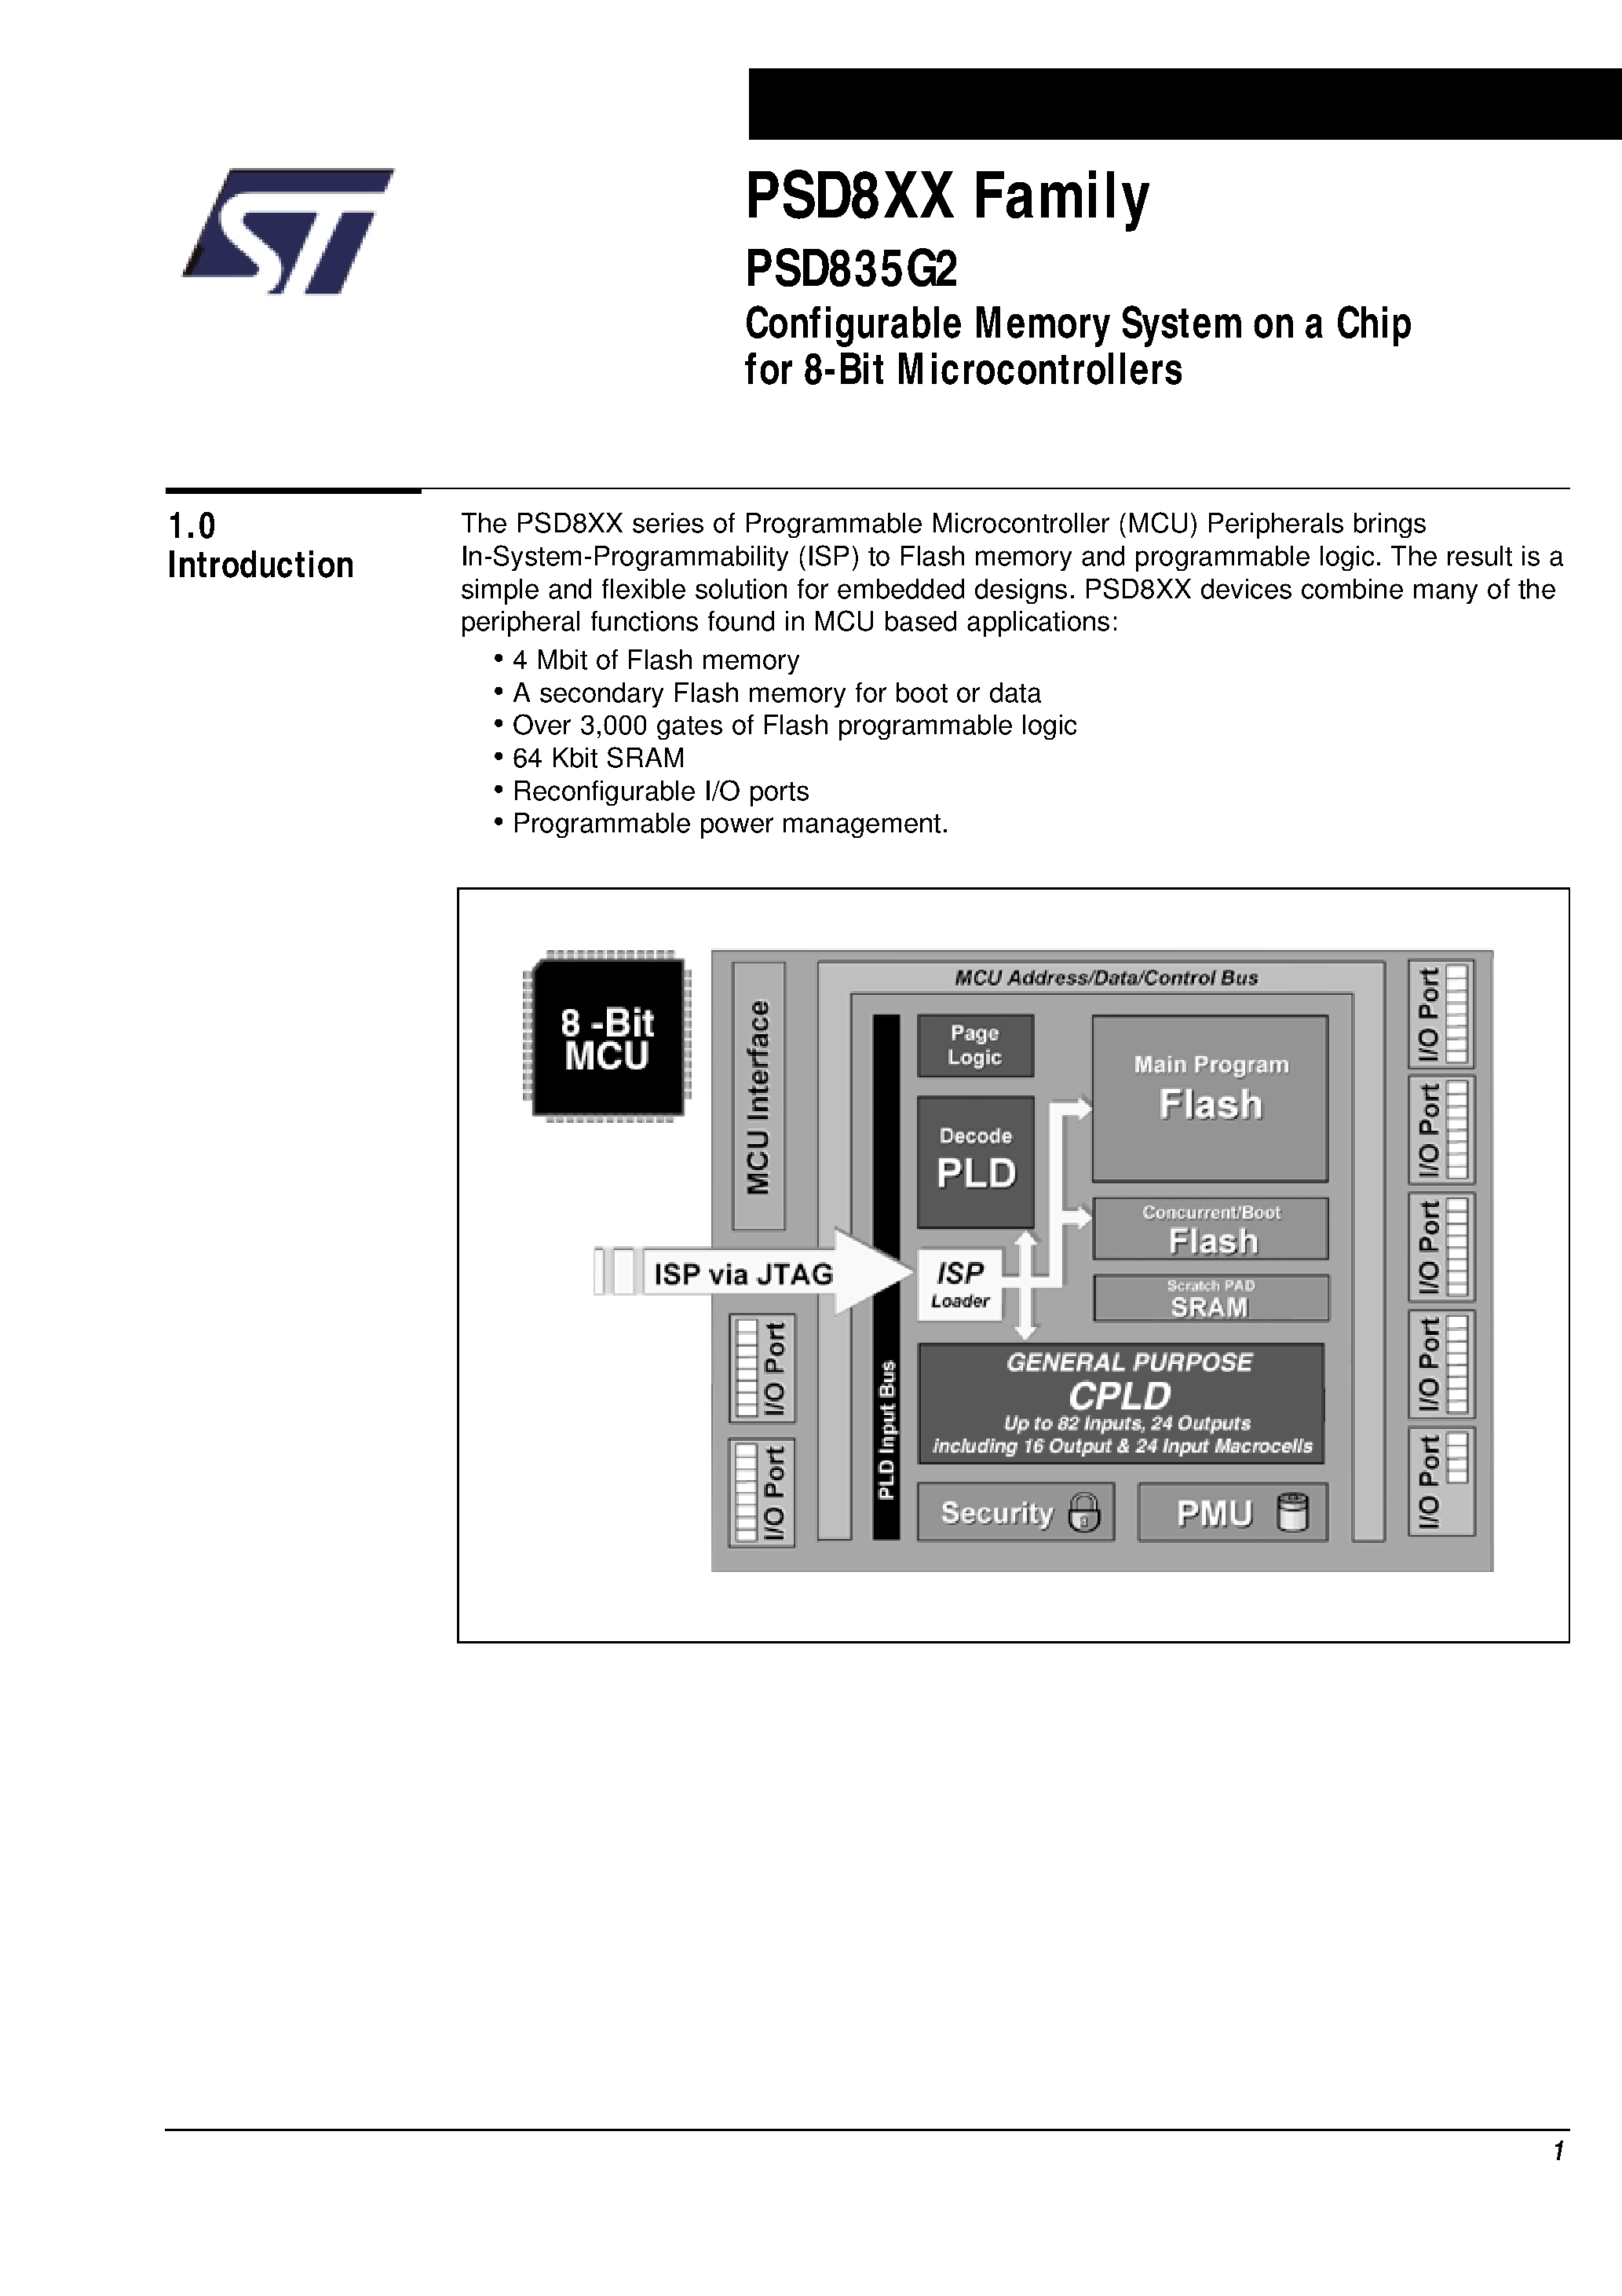 Datasheet PSD835F2-A-12J - Configurable Memory System on a Chip for 8-Bit Microcontrollers page 2